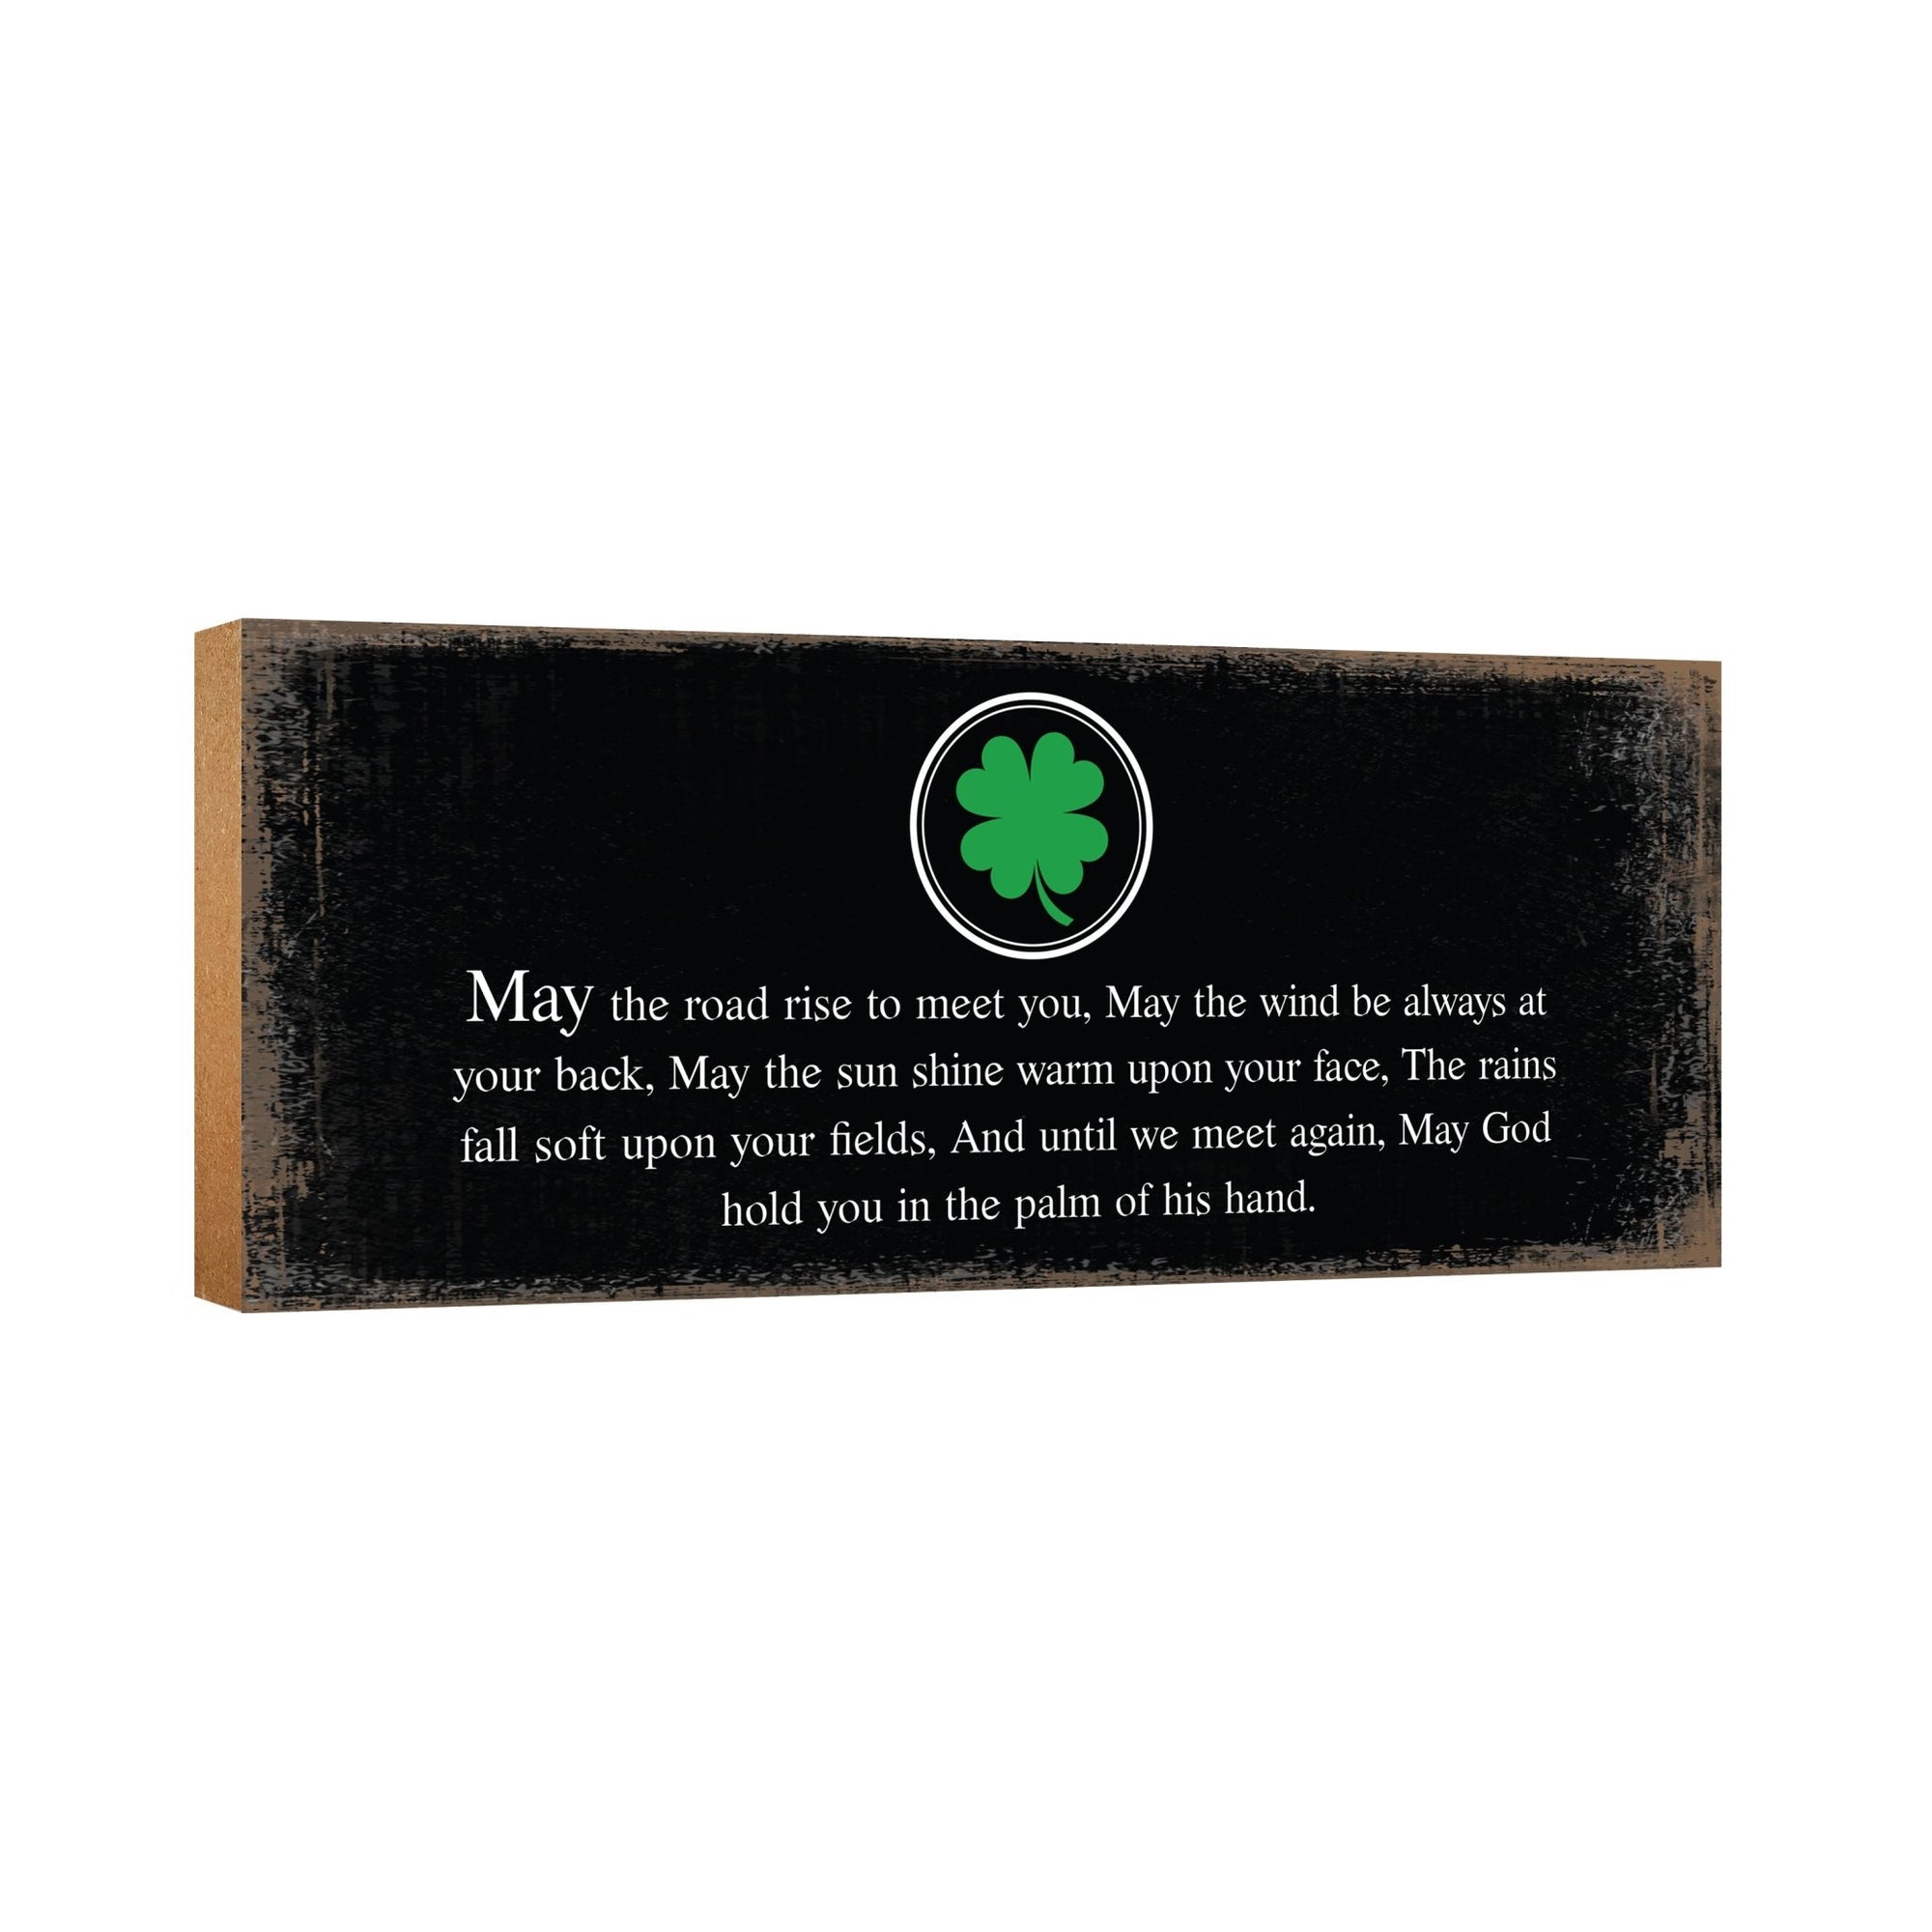 Modern Inspirational Pet Memorial 4x10 inches Wooden Sign (May The Road) Tabletop Plaque Home Decoration Loss of Pet Bereavement Sympathy Keepsake - LifeSong Milestones